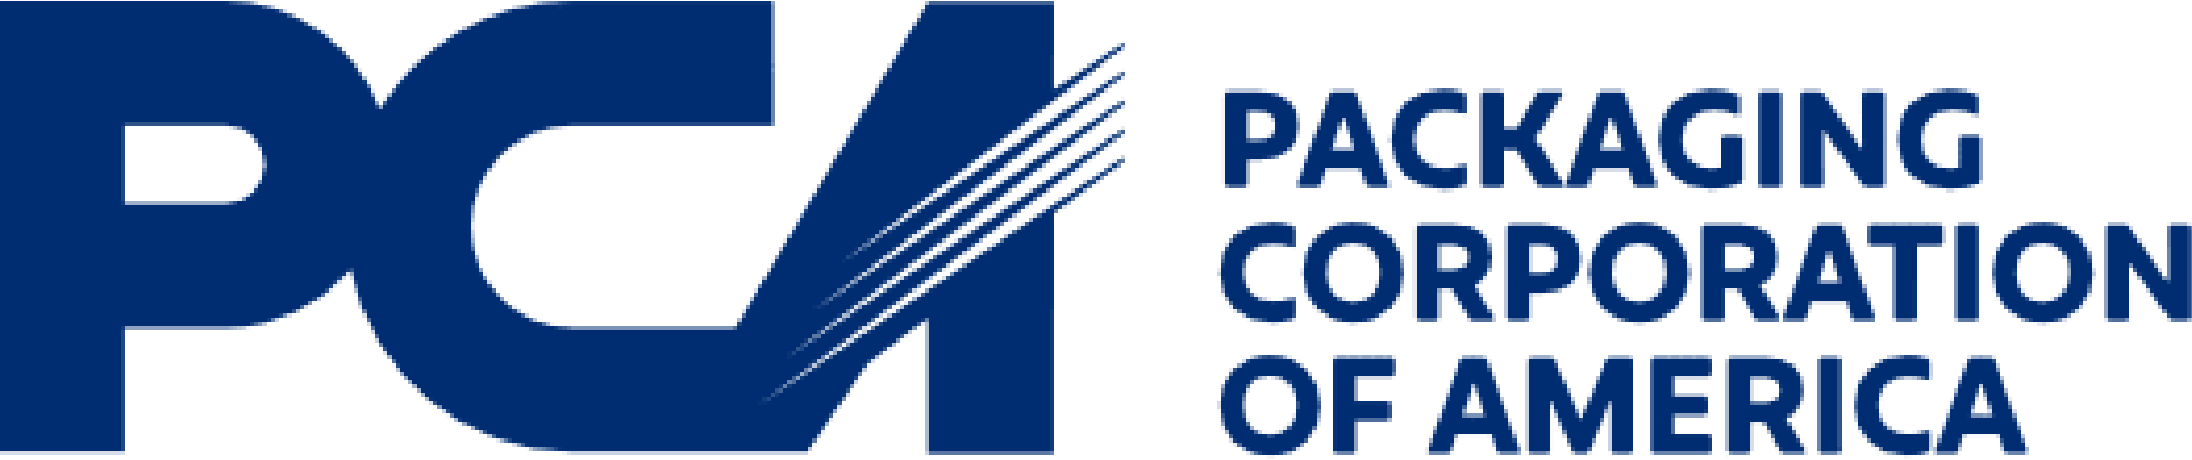 Packaging Corporation of America